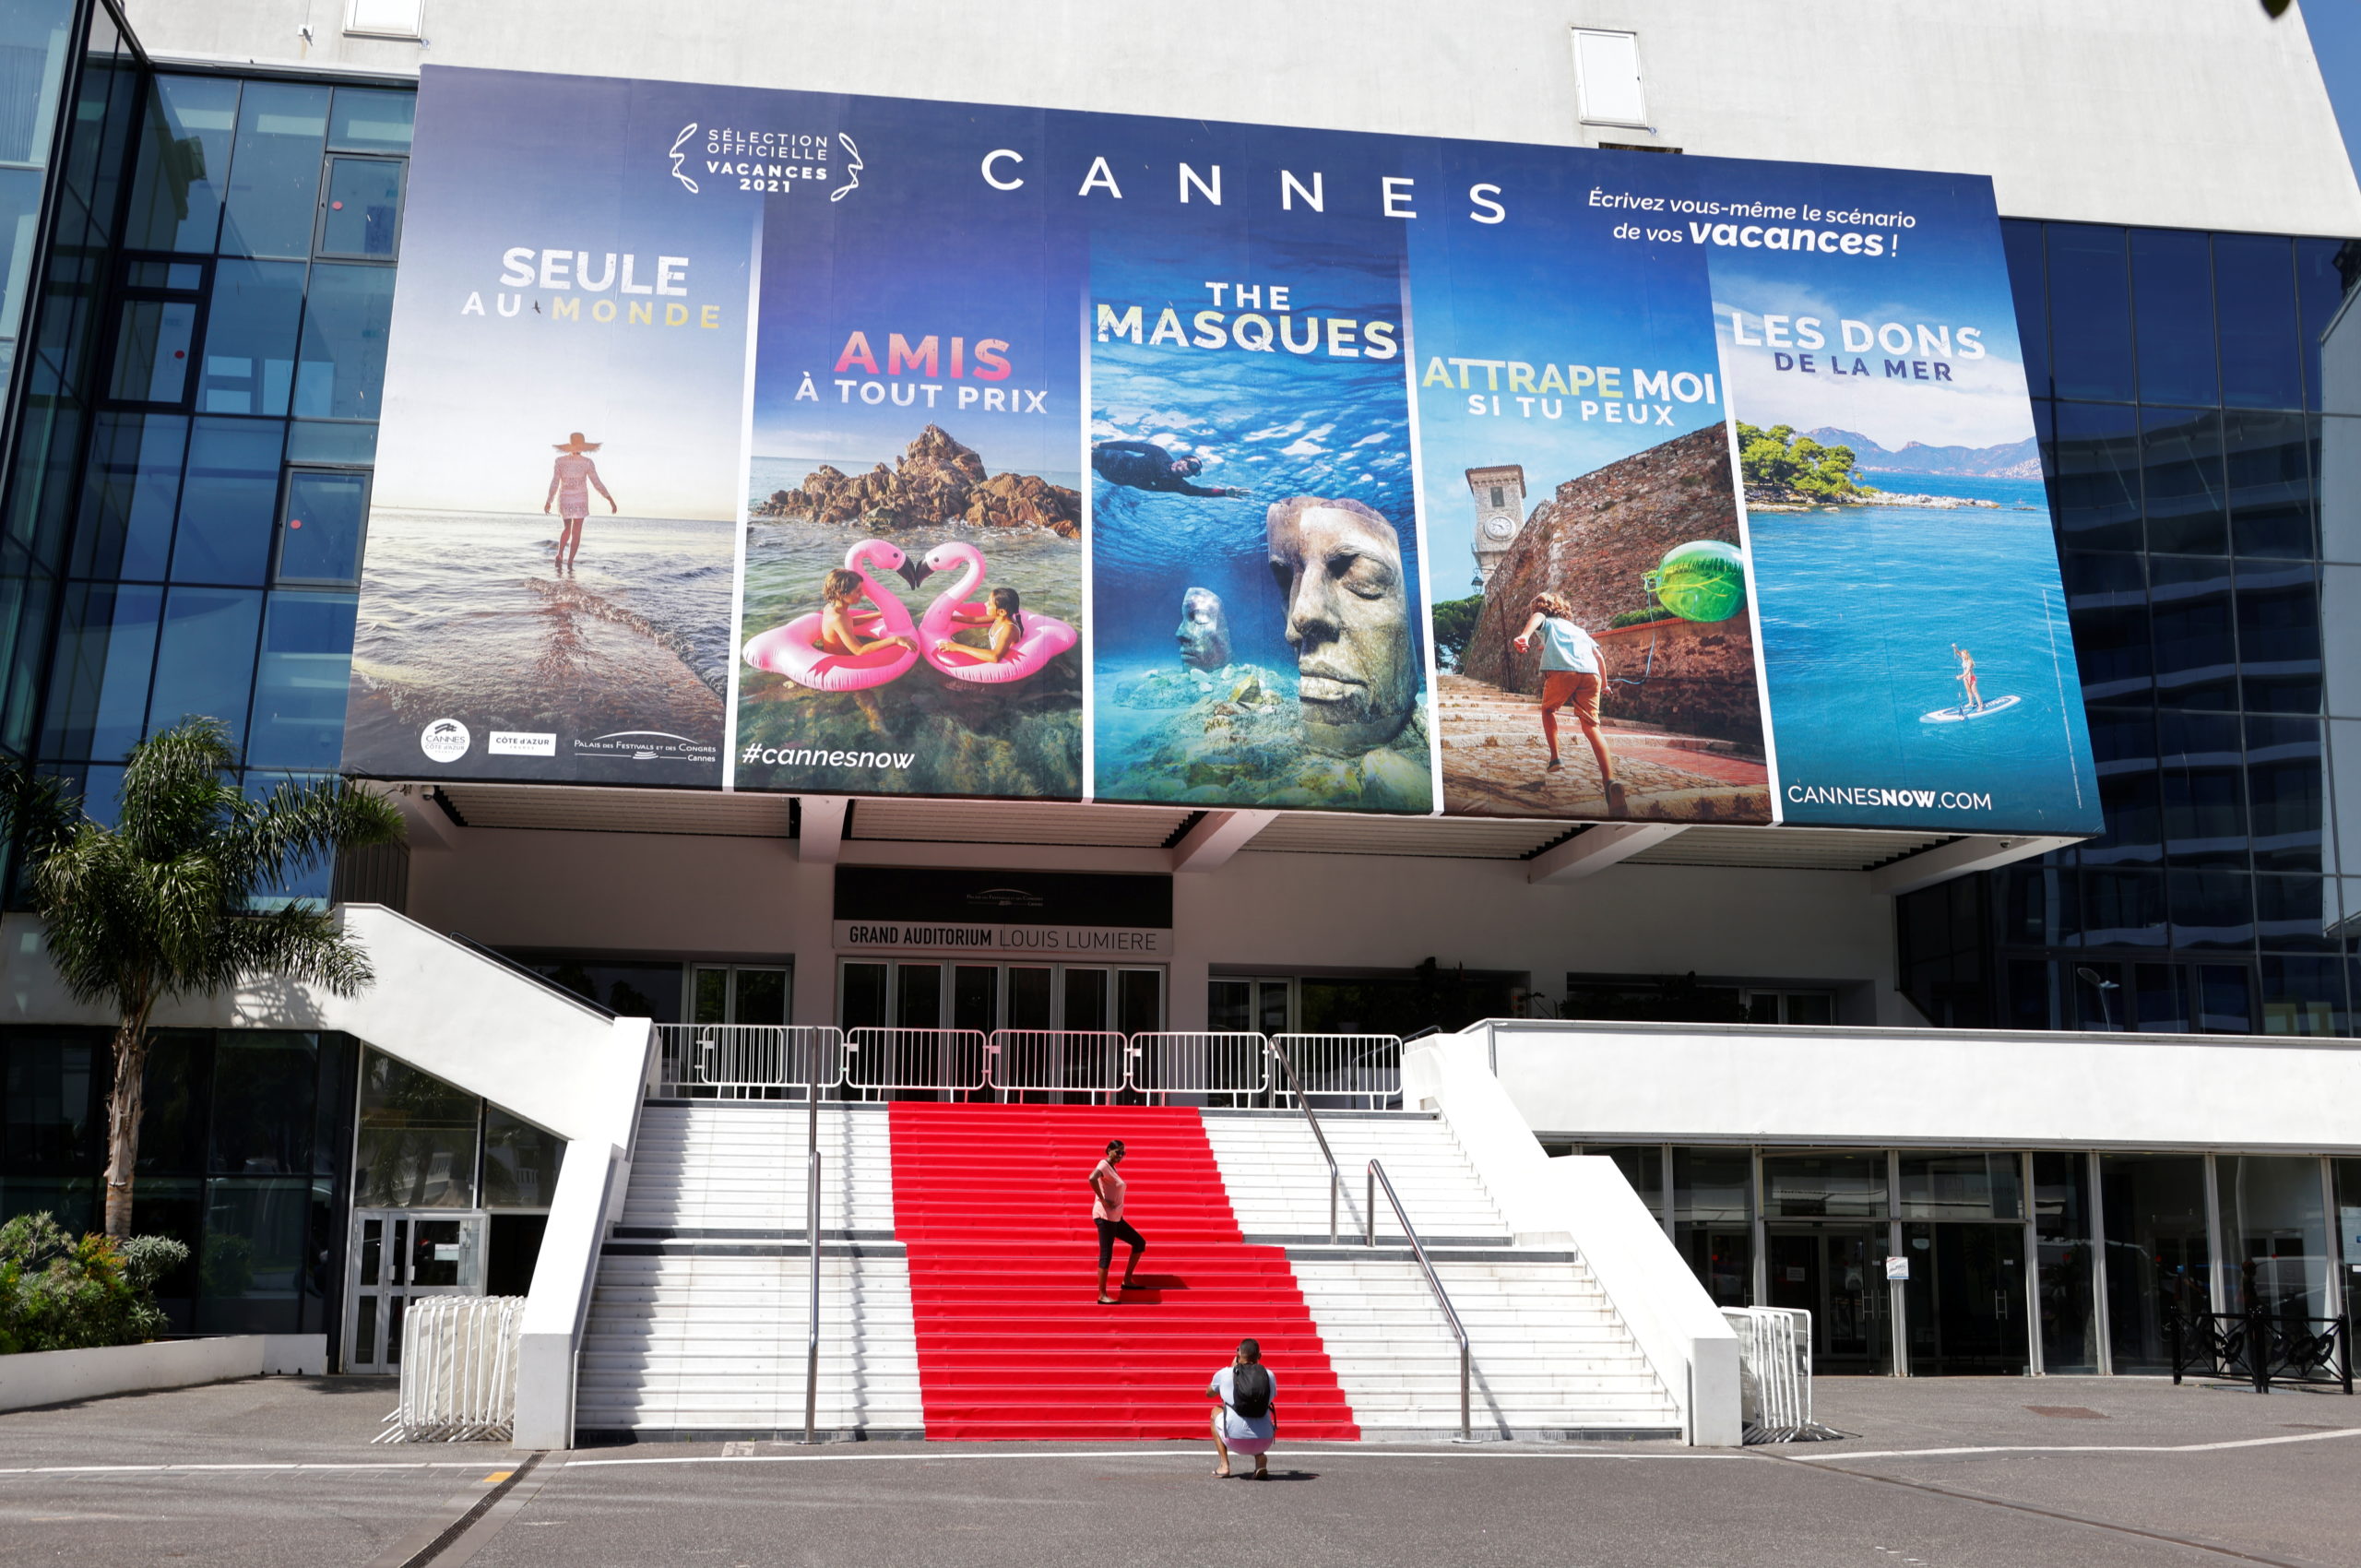 People stand on the red carpet of the Festival palace in Cannes as the French Riviera prepares for the 2021 edition of the Cannes Film Festival which will take place next July, in France, June 3, 2021.  REUTERS/Eric Gaillard